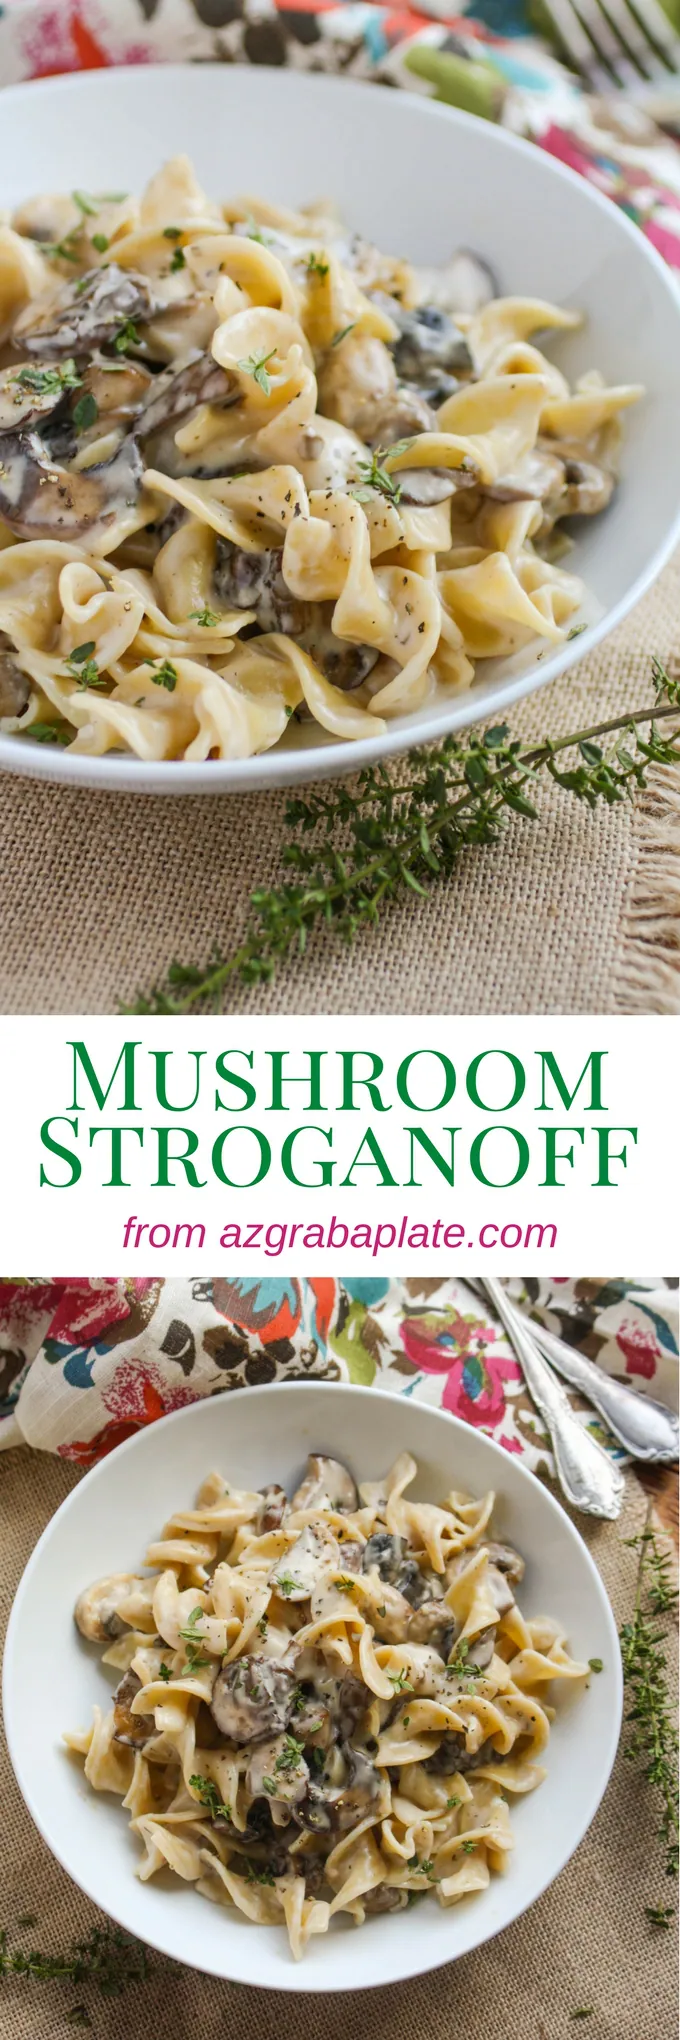 Mushroom Stroganoff is a delicious and hearty dish, perfect on a cold night. You'll love these classic noodles with the mushrooms and cream sauce.